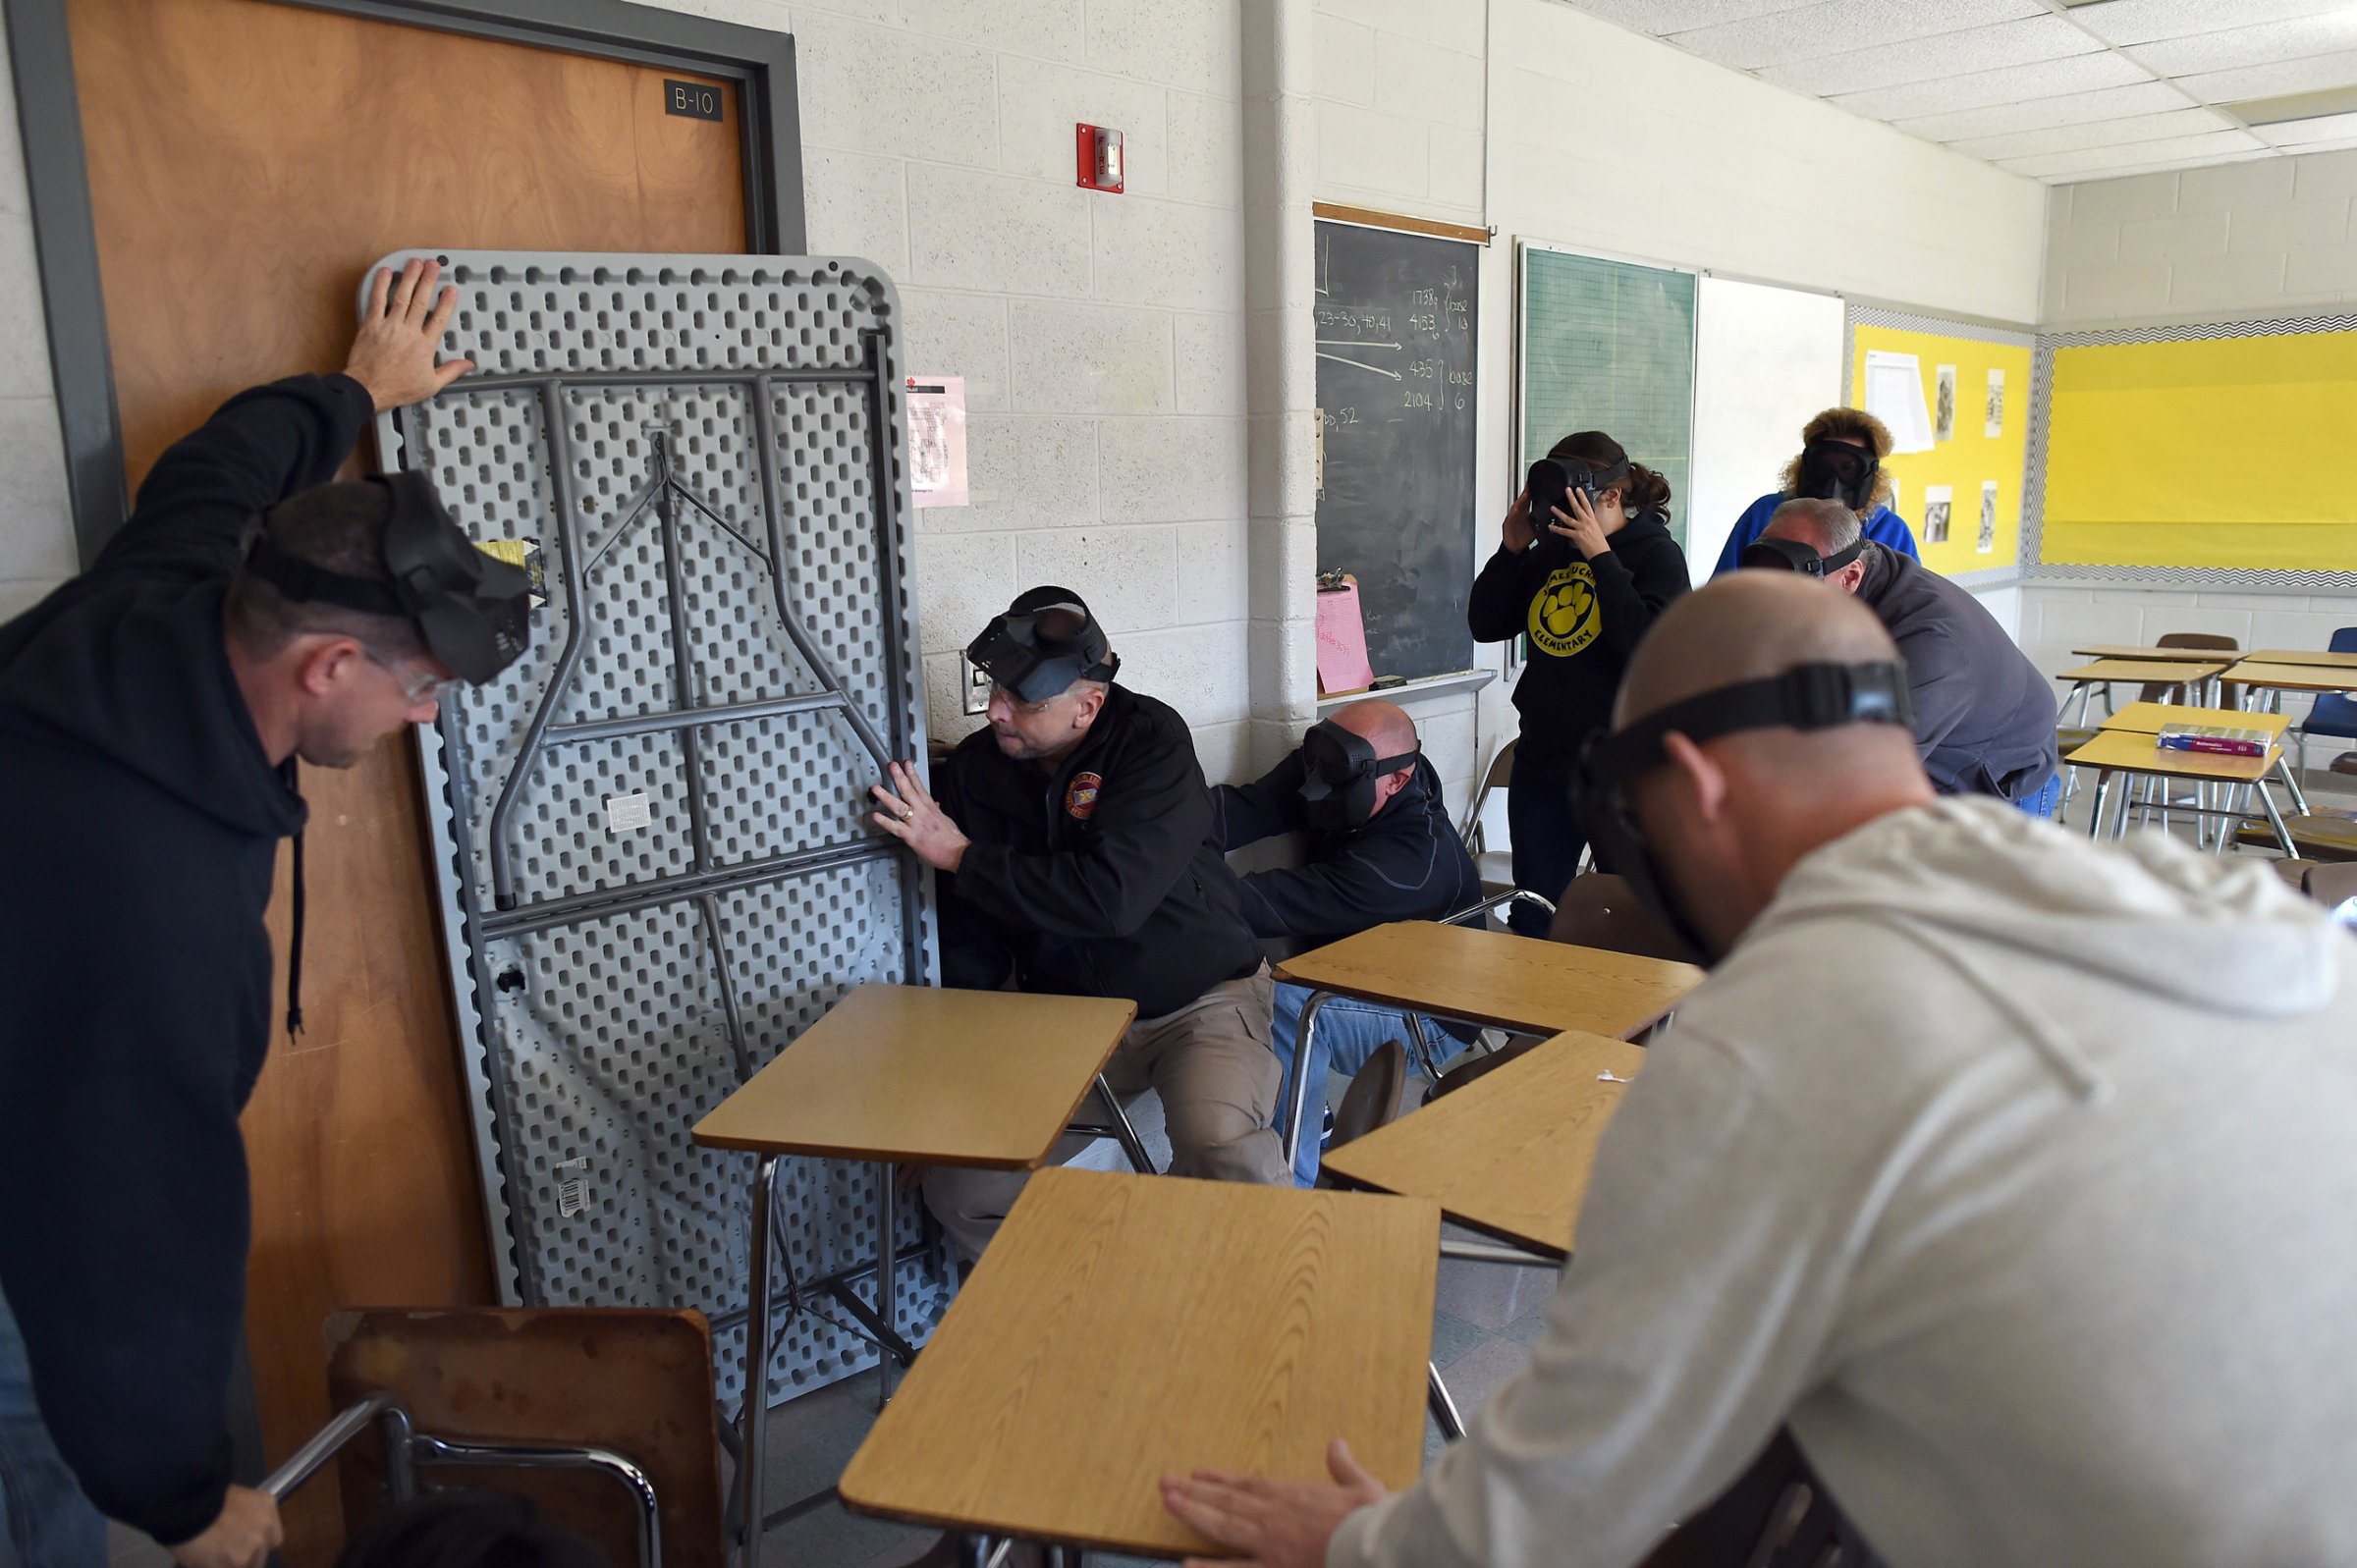 Participants barricade a door of a classroom to block an "active shooter" during ALICE (Alert, Lockdown, Inform, Counter and Evacuate) training at the Harry S. Truman High School in Levittown, Pennsylvania, on November 3, 2015. ALICE is designed to educate local and school-based law enforcement, as well as administrators, teachers and others about the research-based, proactive response approach to violent Intruder events. AFP PHOTO/JEWEL SAMAD (Photo credit should read JEWEL SAMAD/AFP/Getty Images)